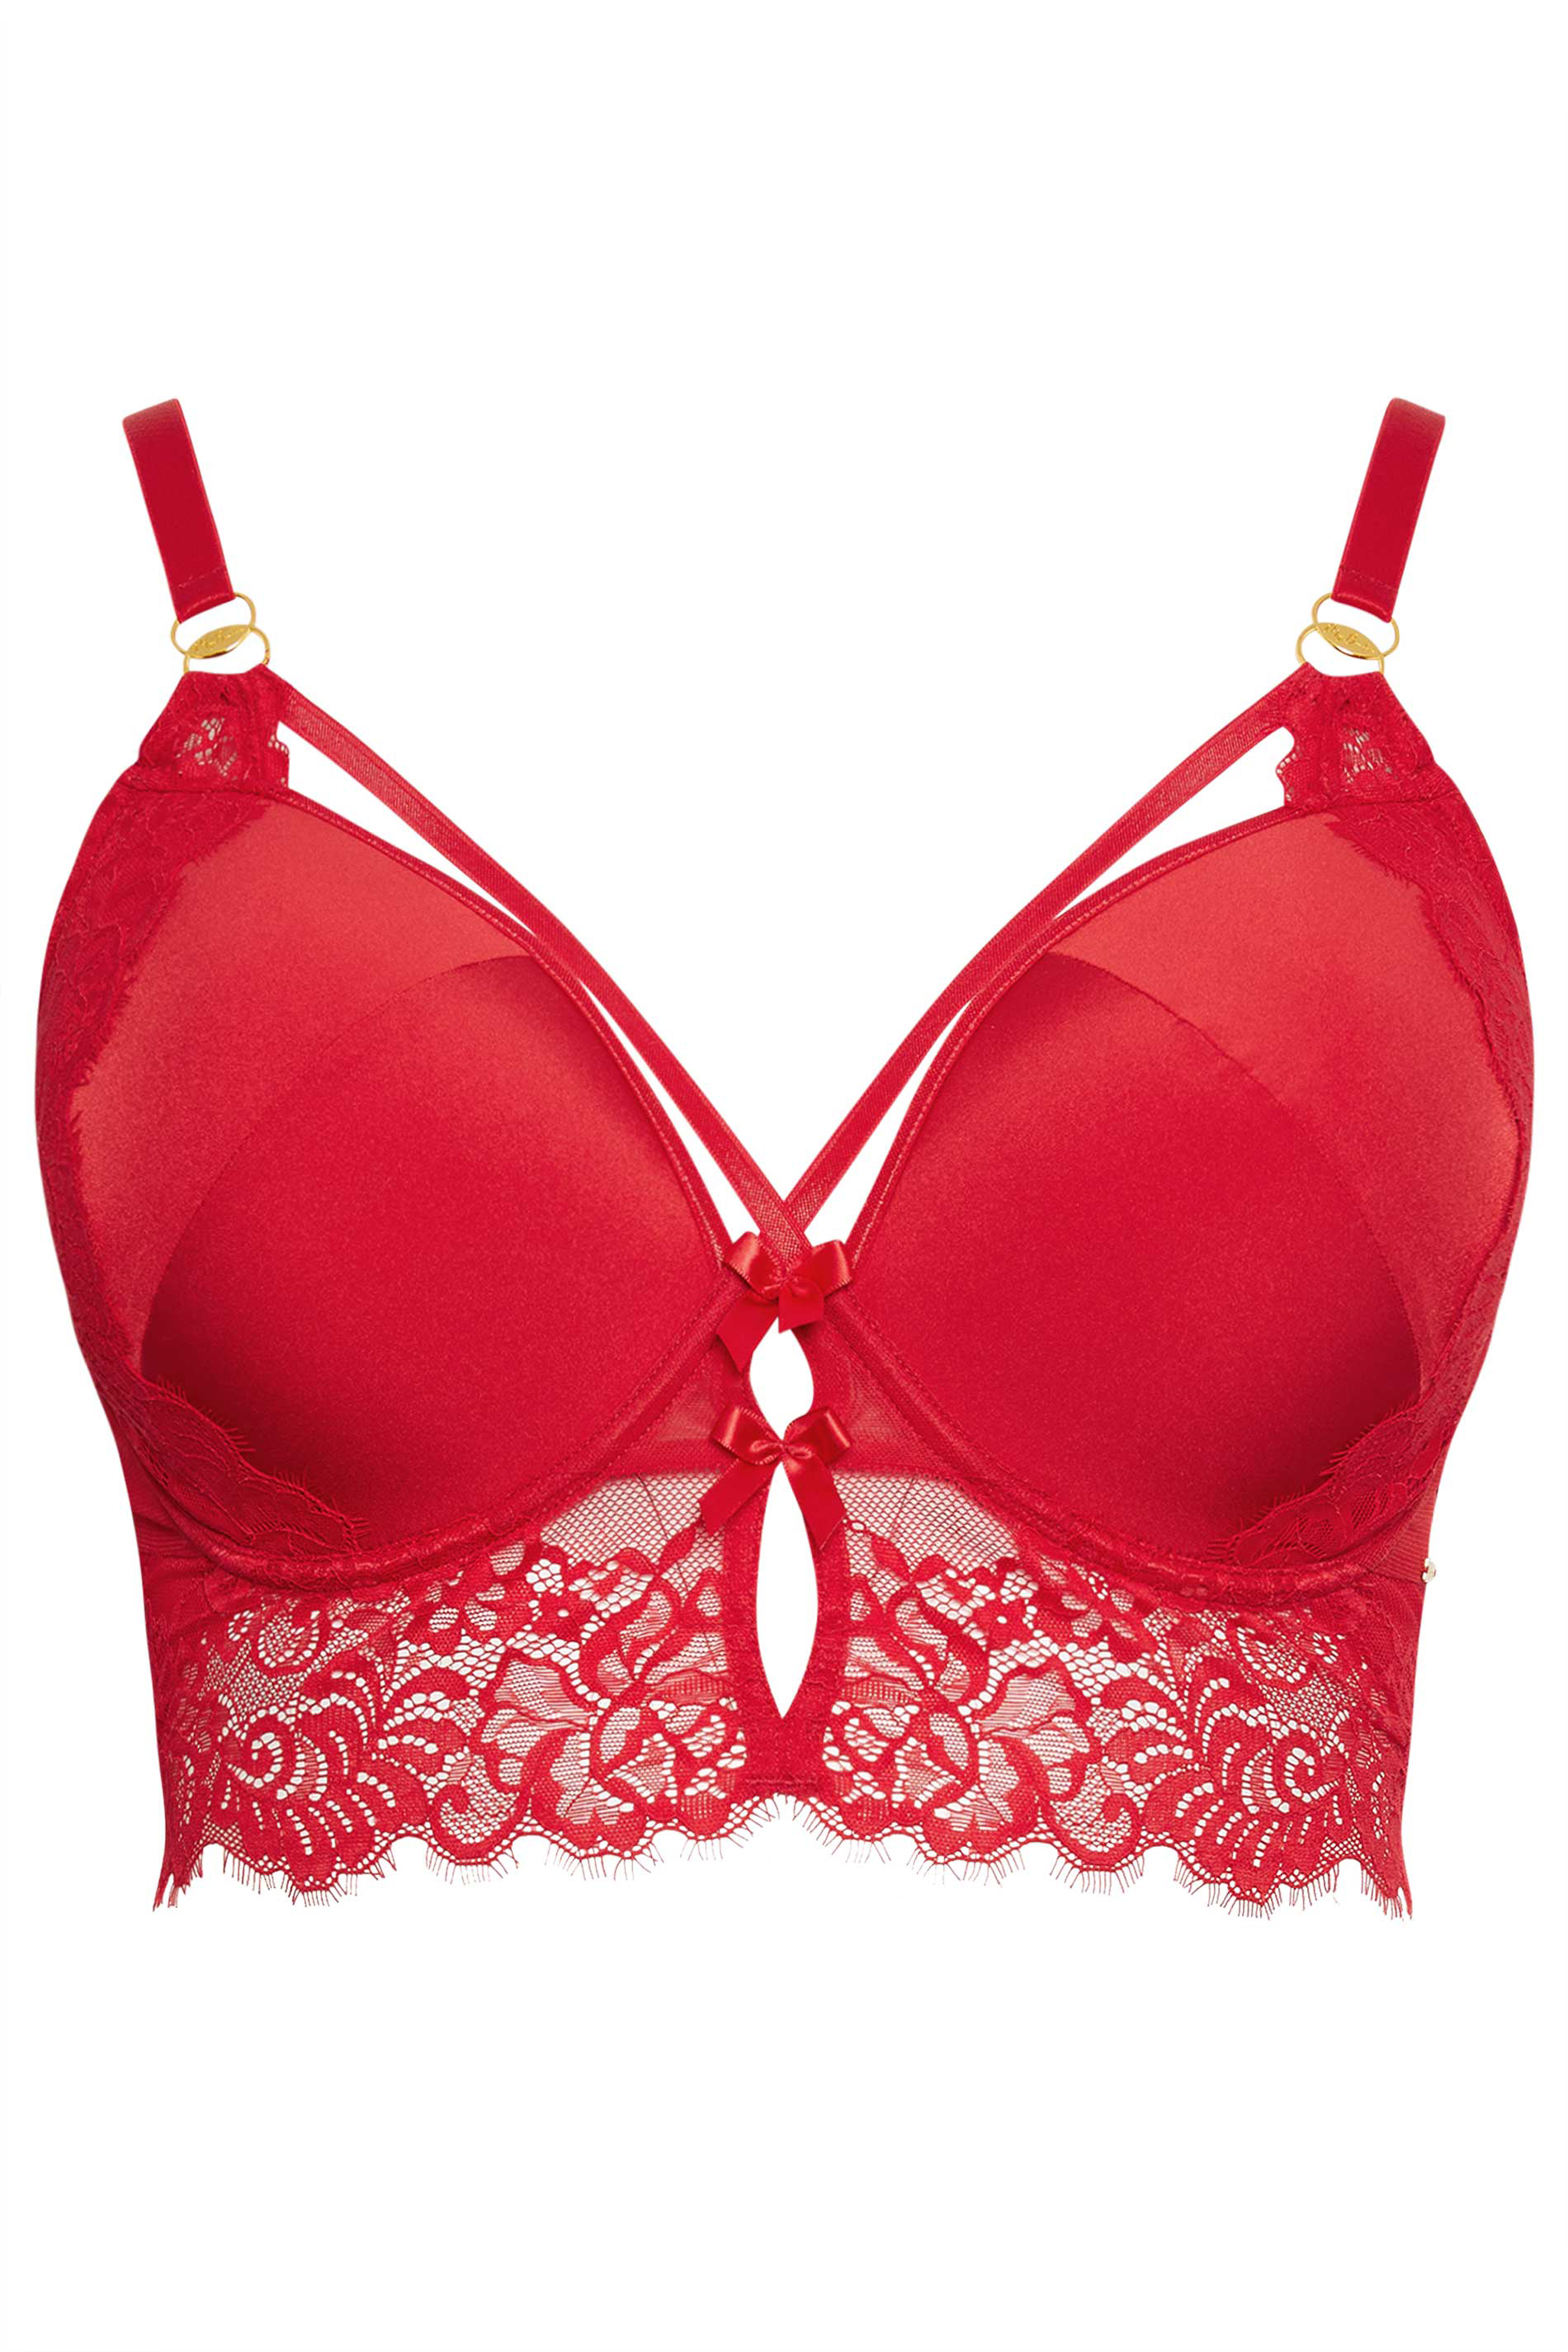 Photo of Lacy Bra on Red Silky Fabric